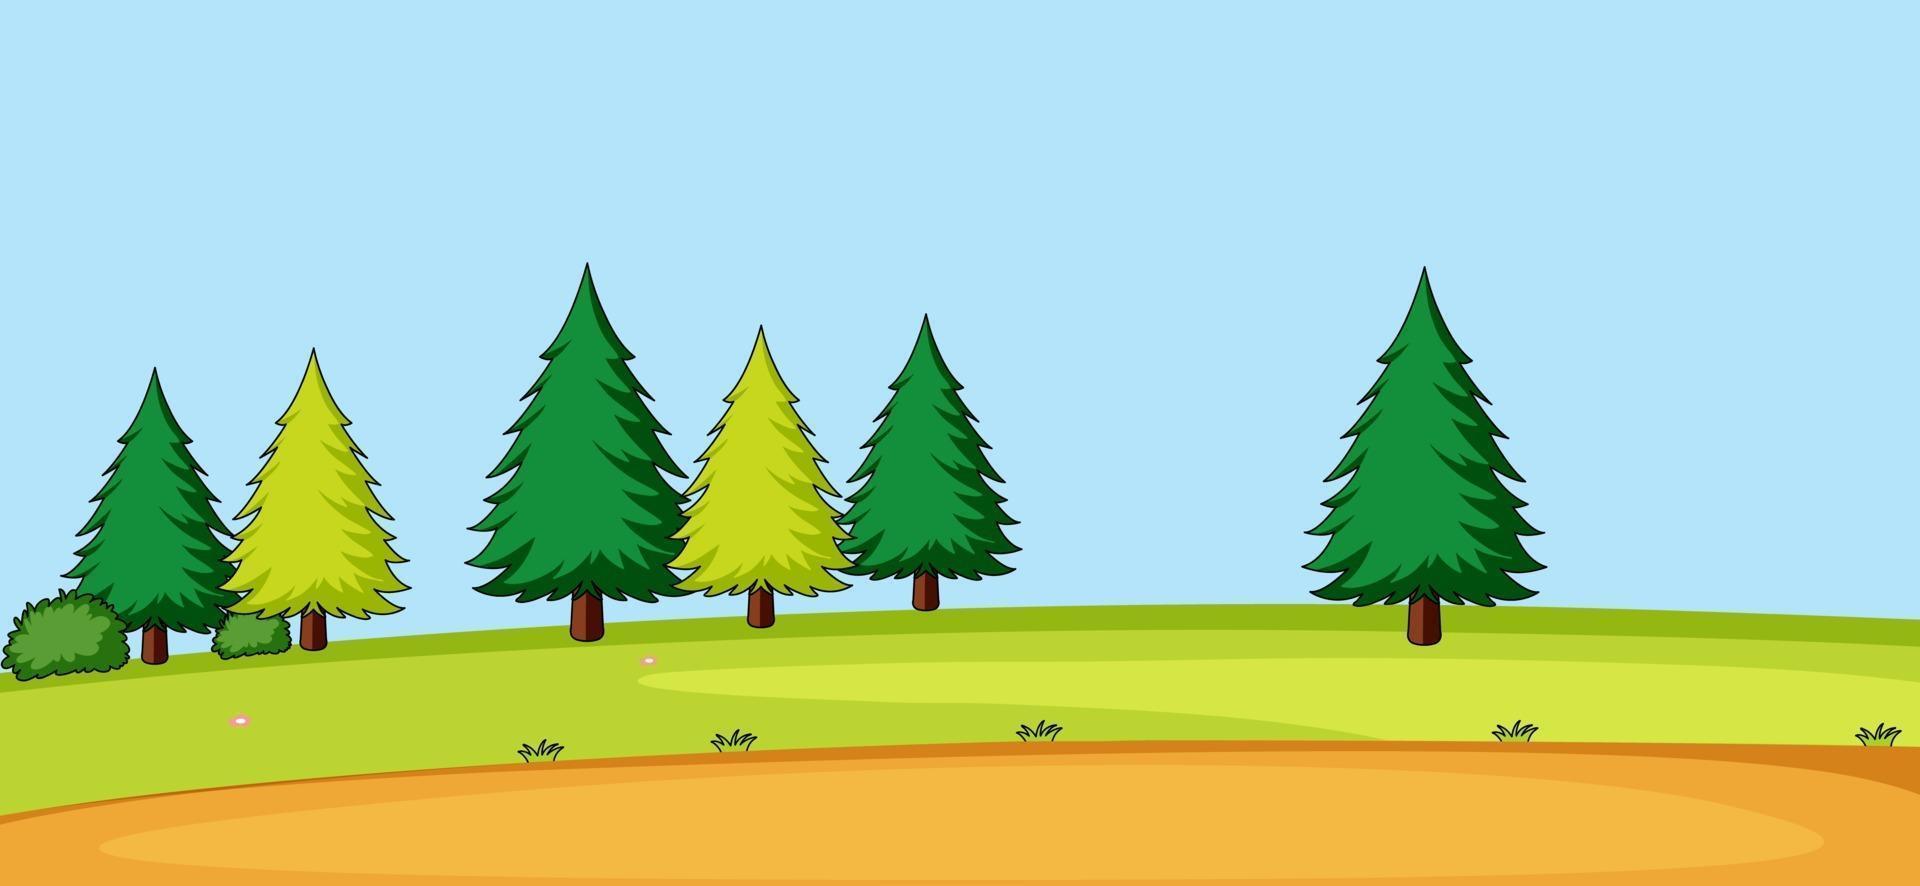 Empty park landscape scene with many trees vector